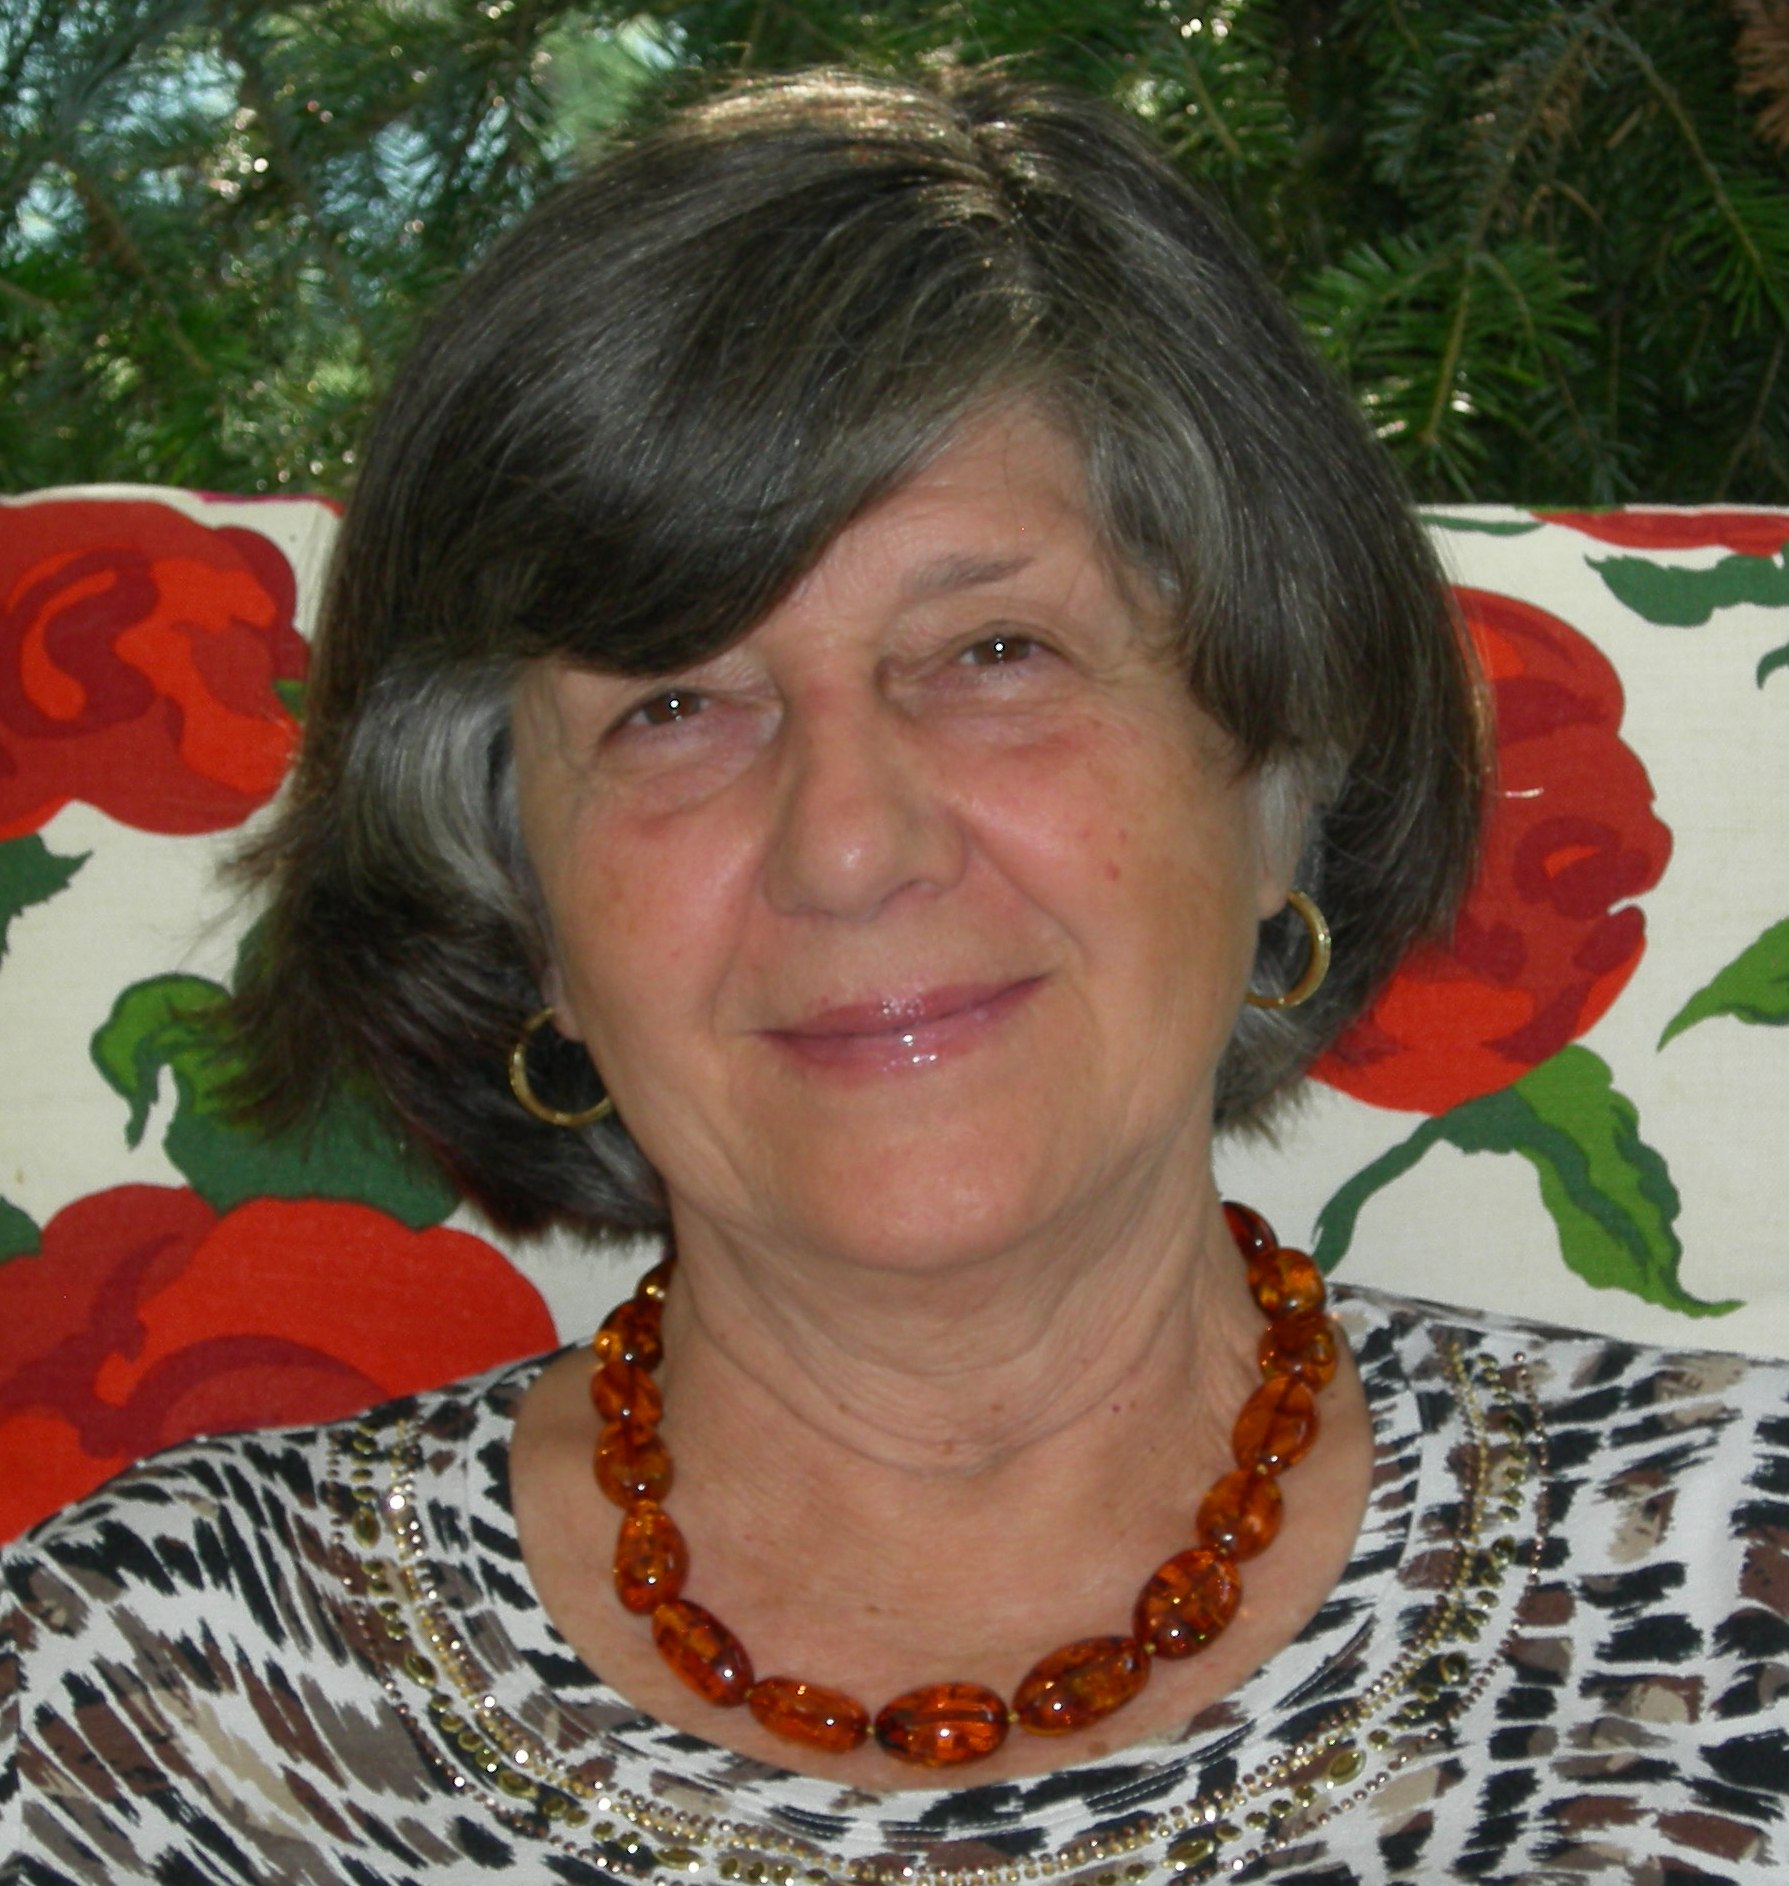 image of Anne Grazia Laura, smiling older white woman with greying hair seated on chair with pattern of large red flowers